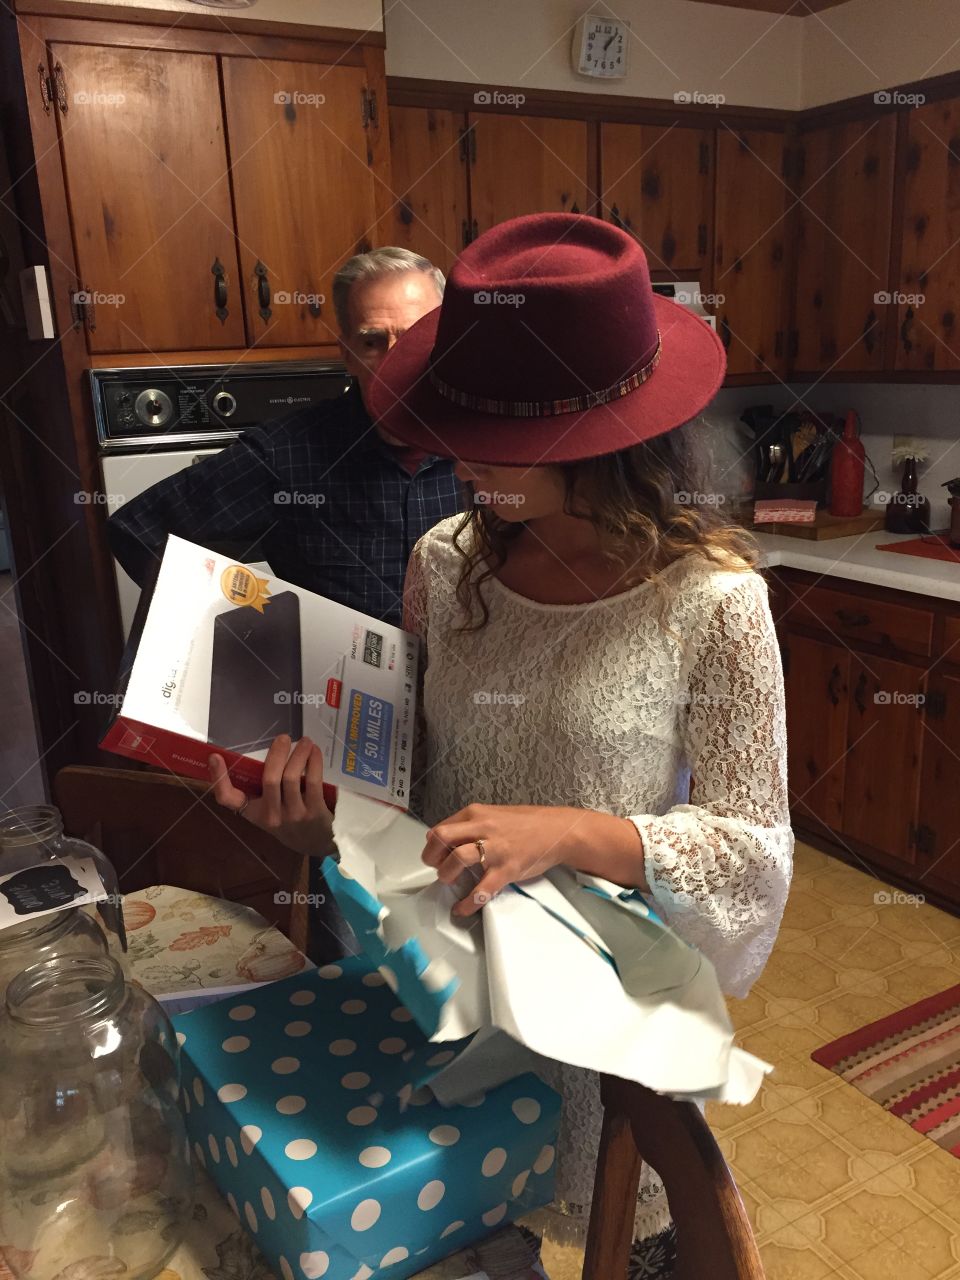 Young lady decked out in maroon hat cream dress, opening a gift.